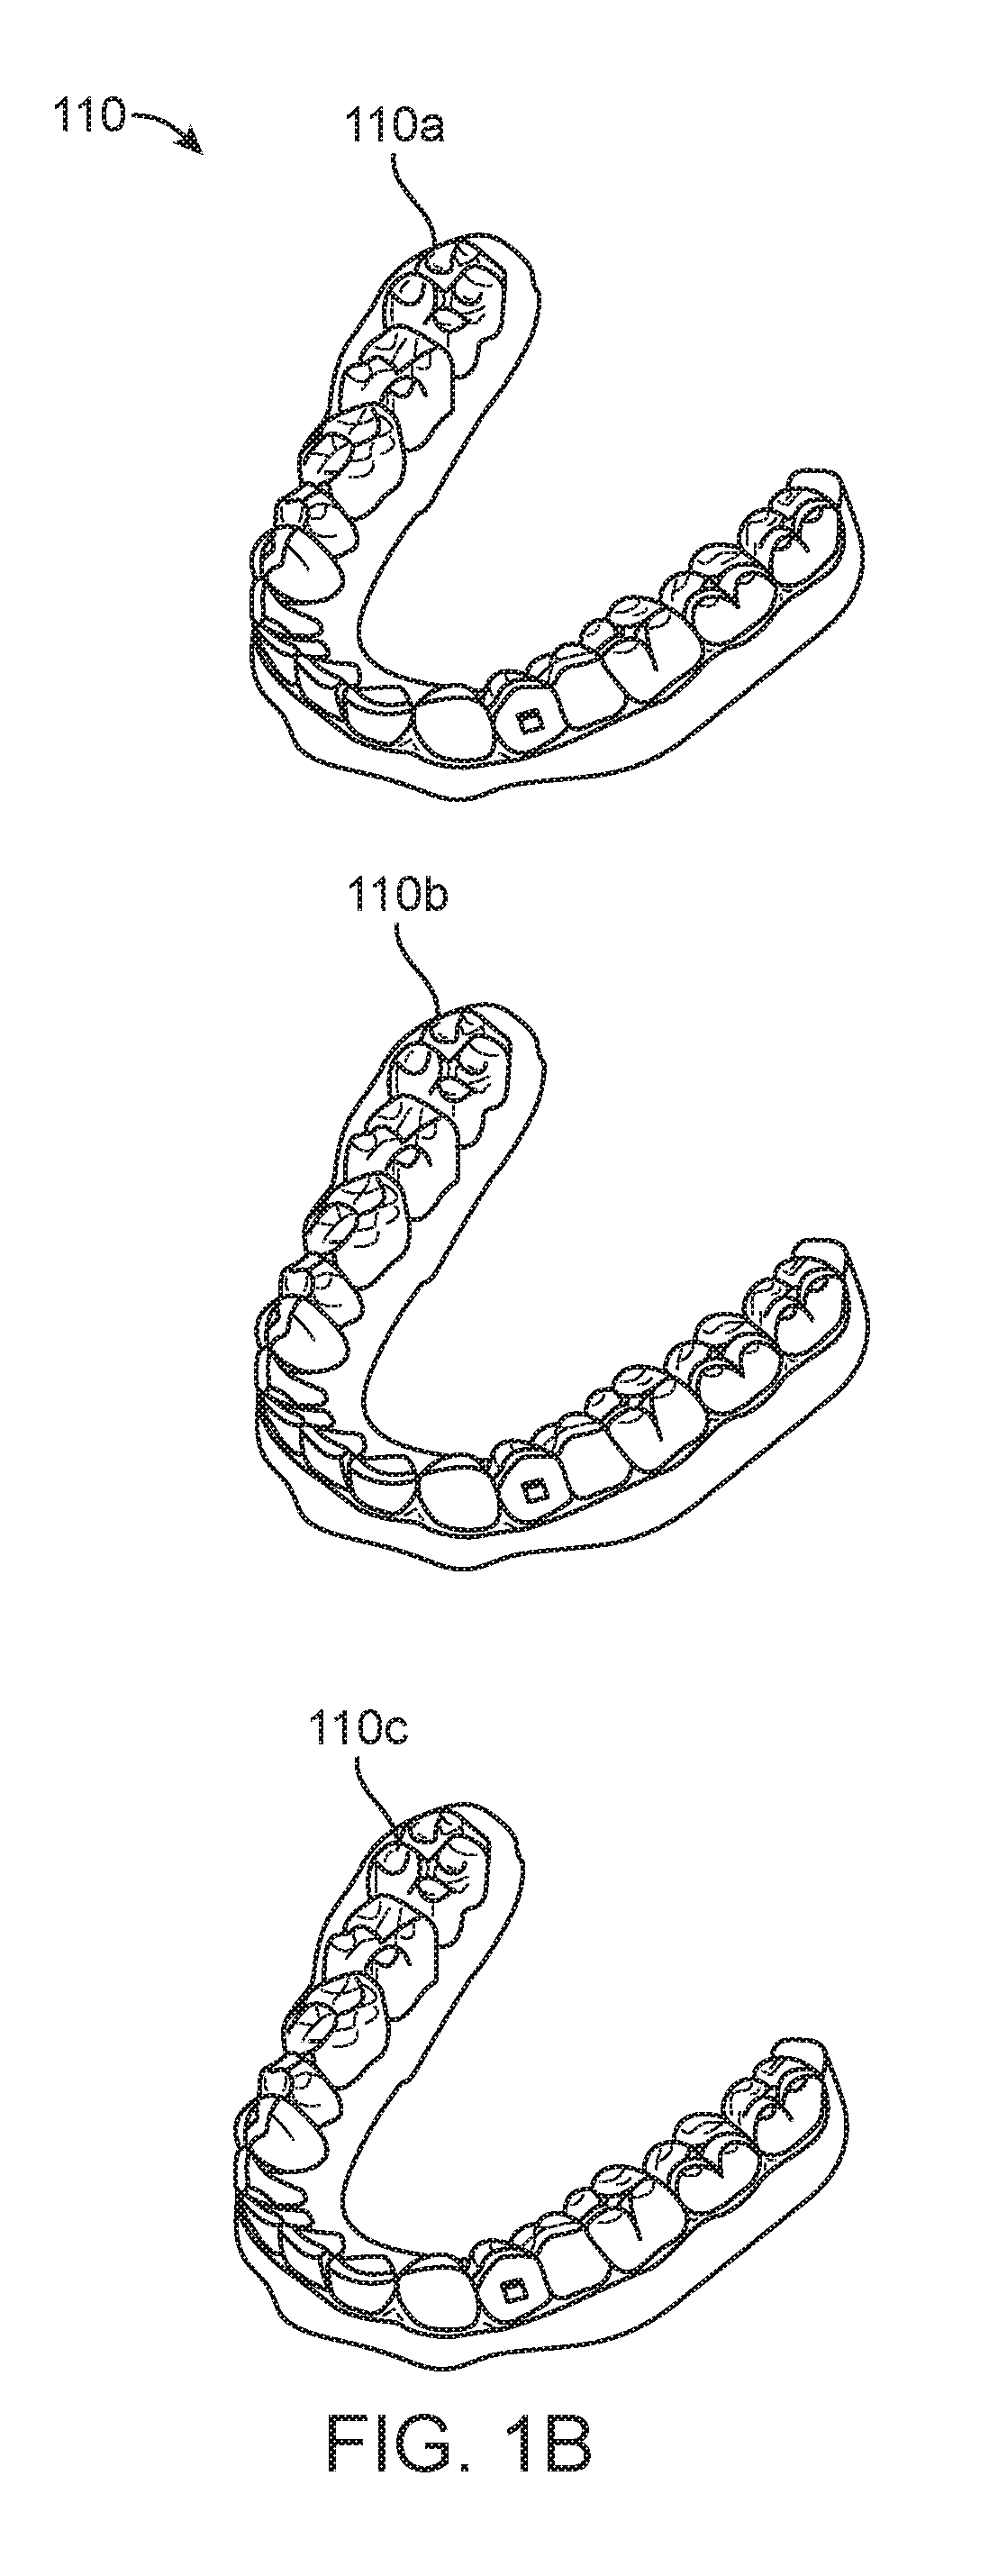 Direct fabrication of aligners with interproximal force coupling